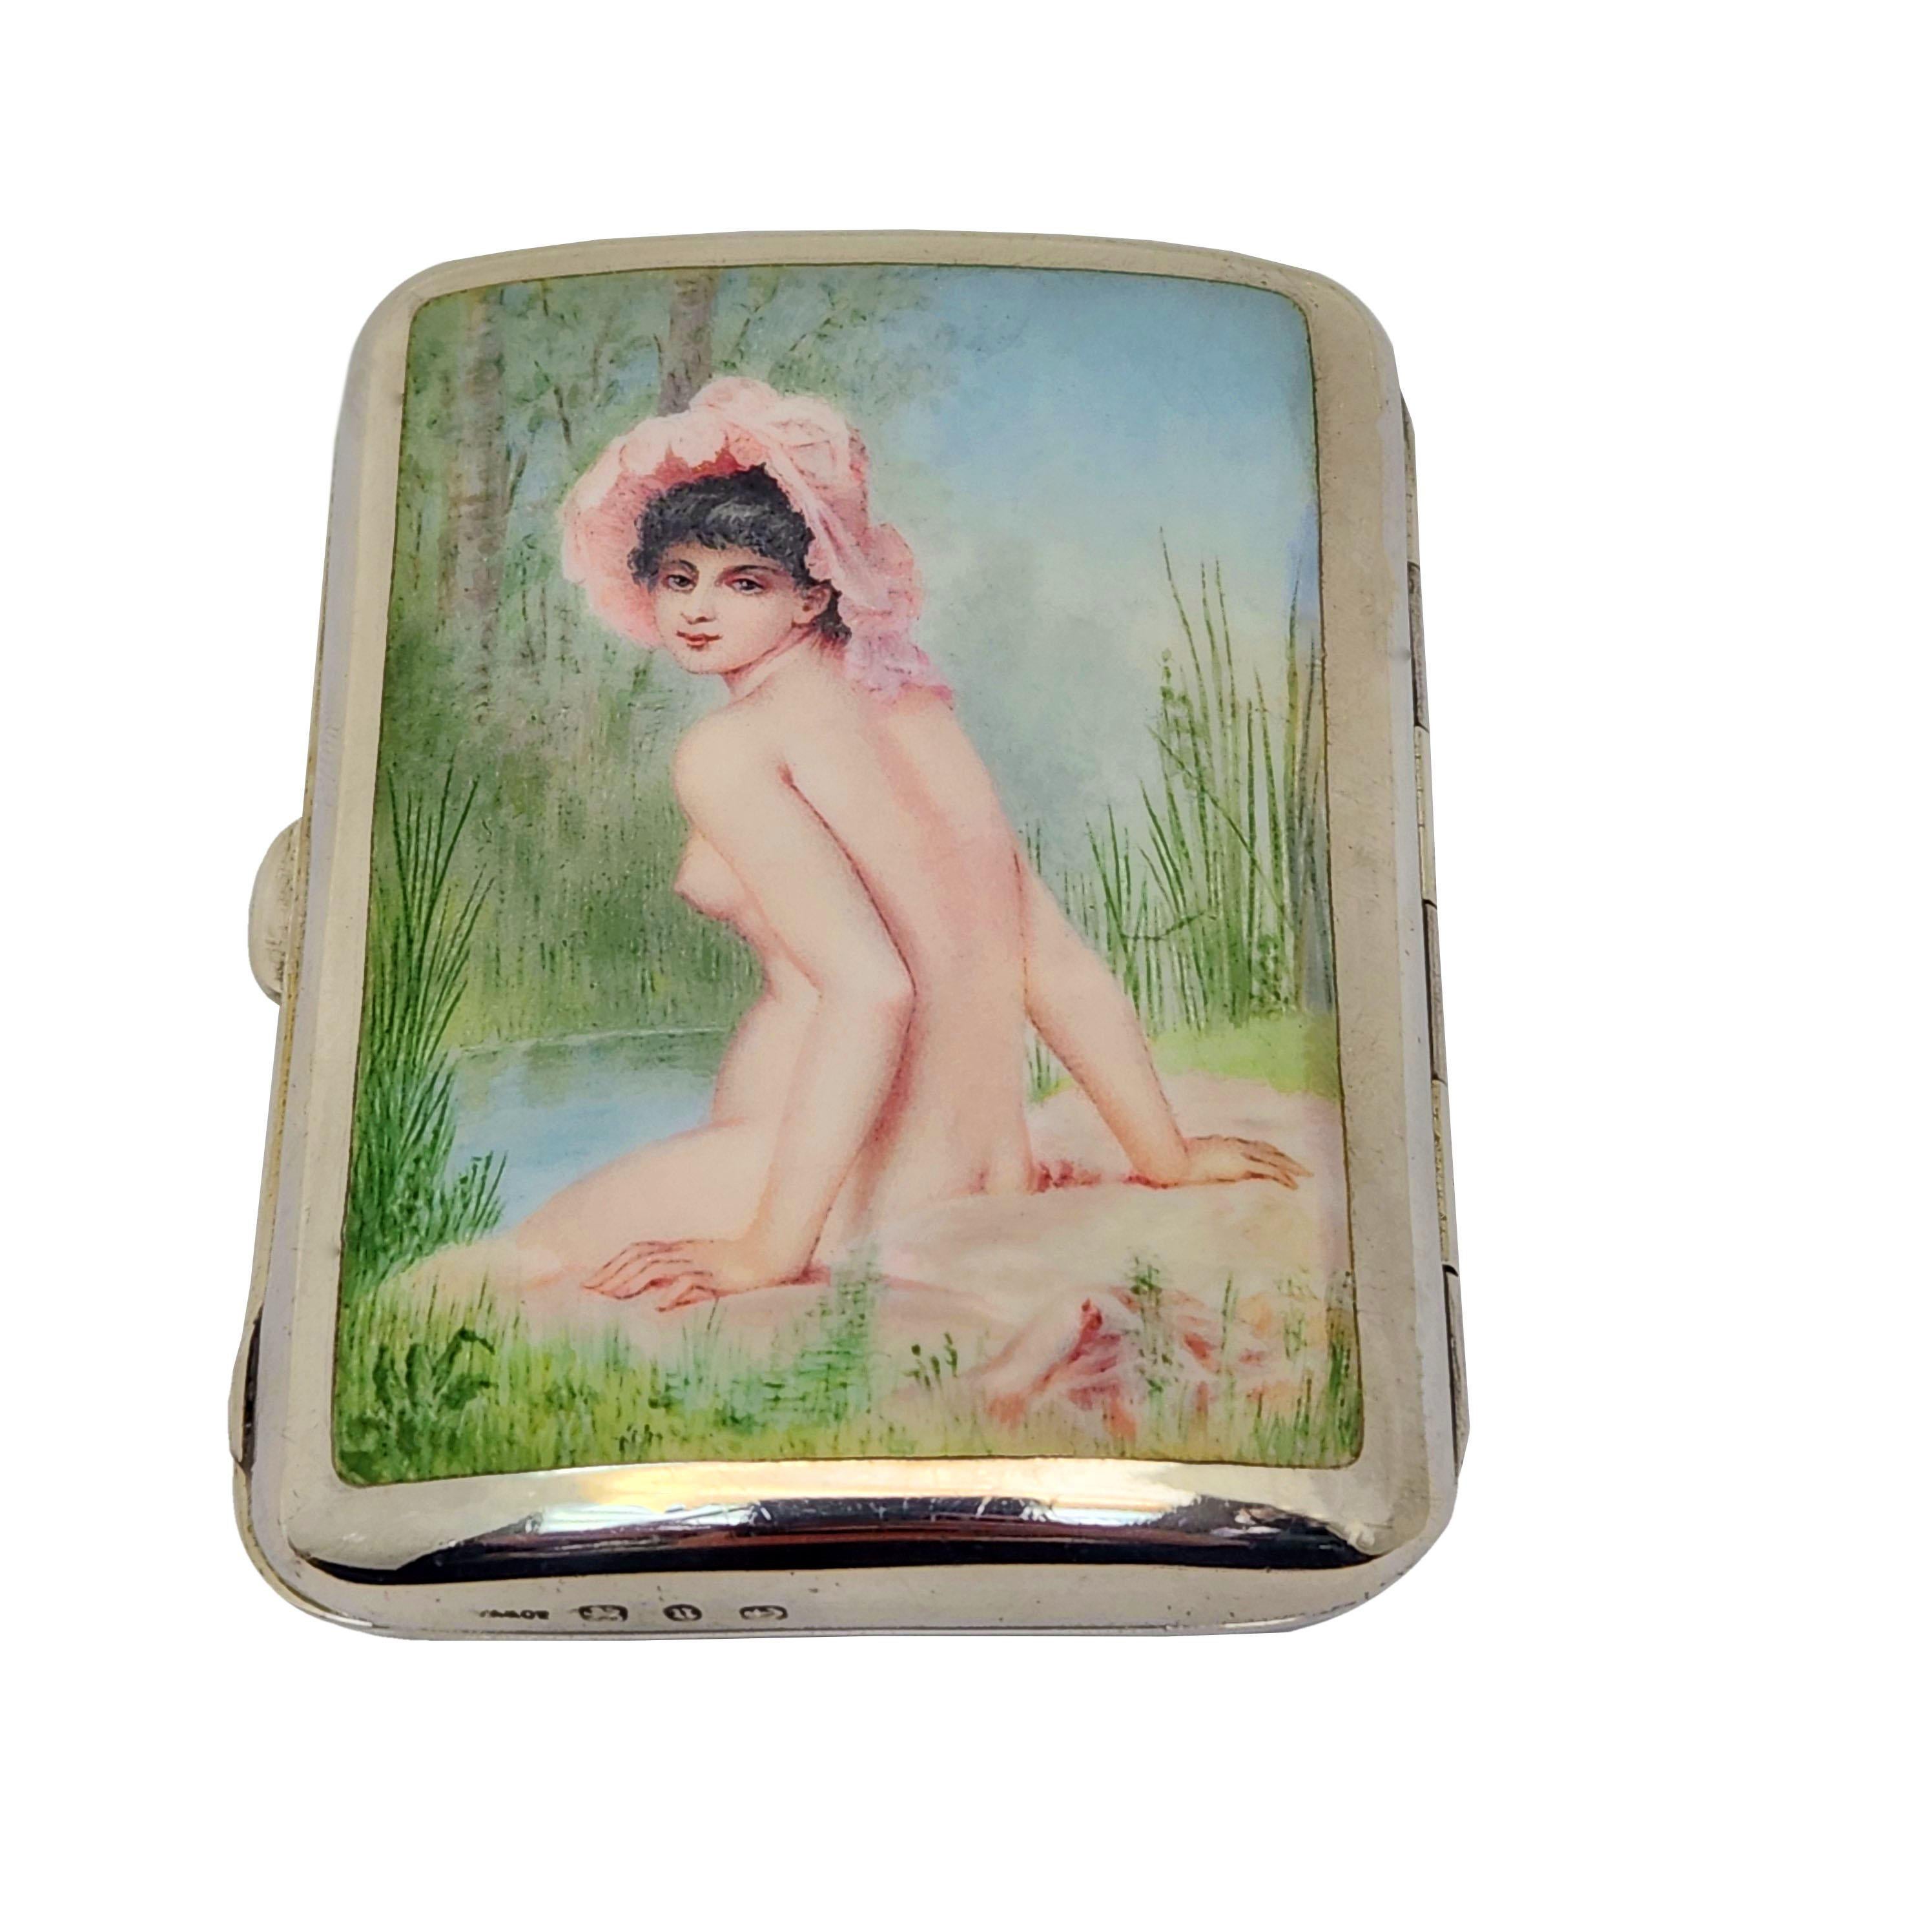 An beautiful Antique Victorian Silver & Enamel Cigarette Case. The Cover of this Cigarette Case had a gorgeous Enamelled Imaged of a naked woman sitting on the banks of a river wearing only an impressive pink hat. Th back of the case has an engraved